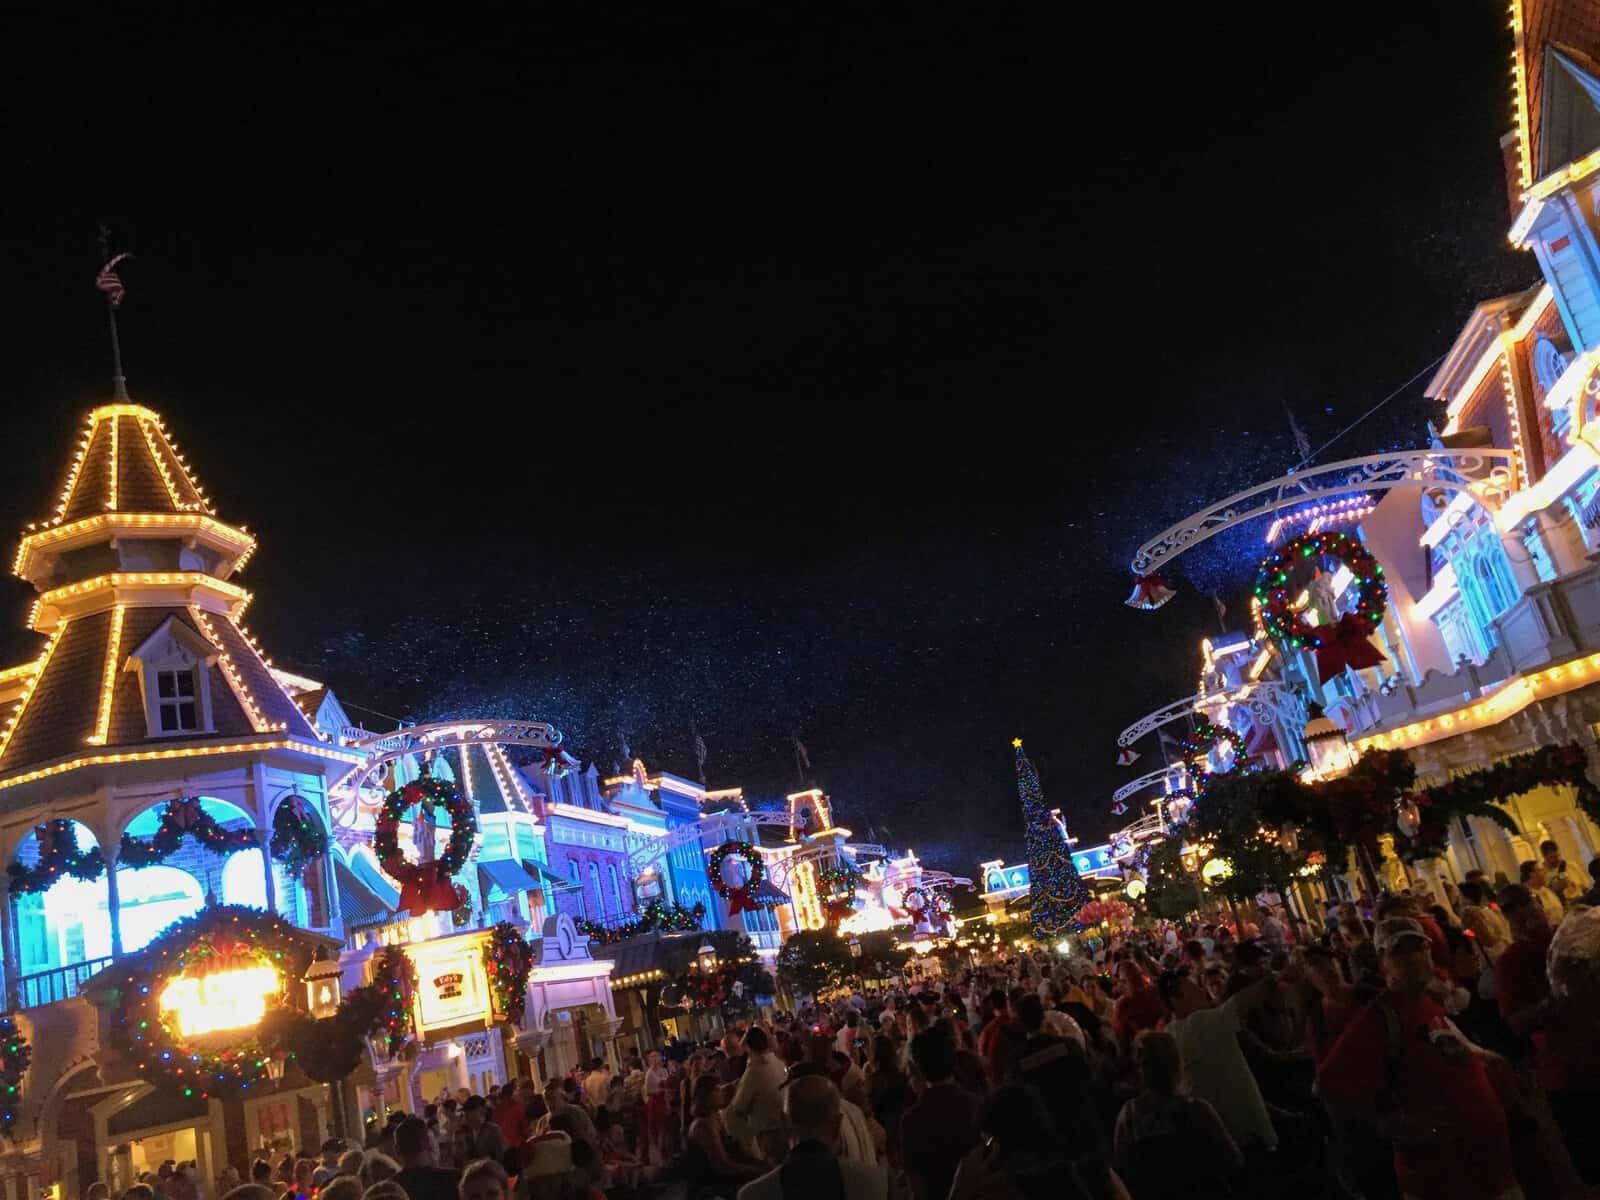 How to handle the crowds at Disney World during Christmas